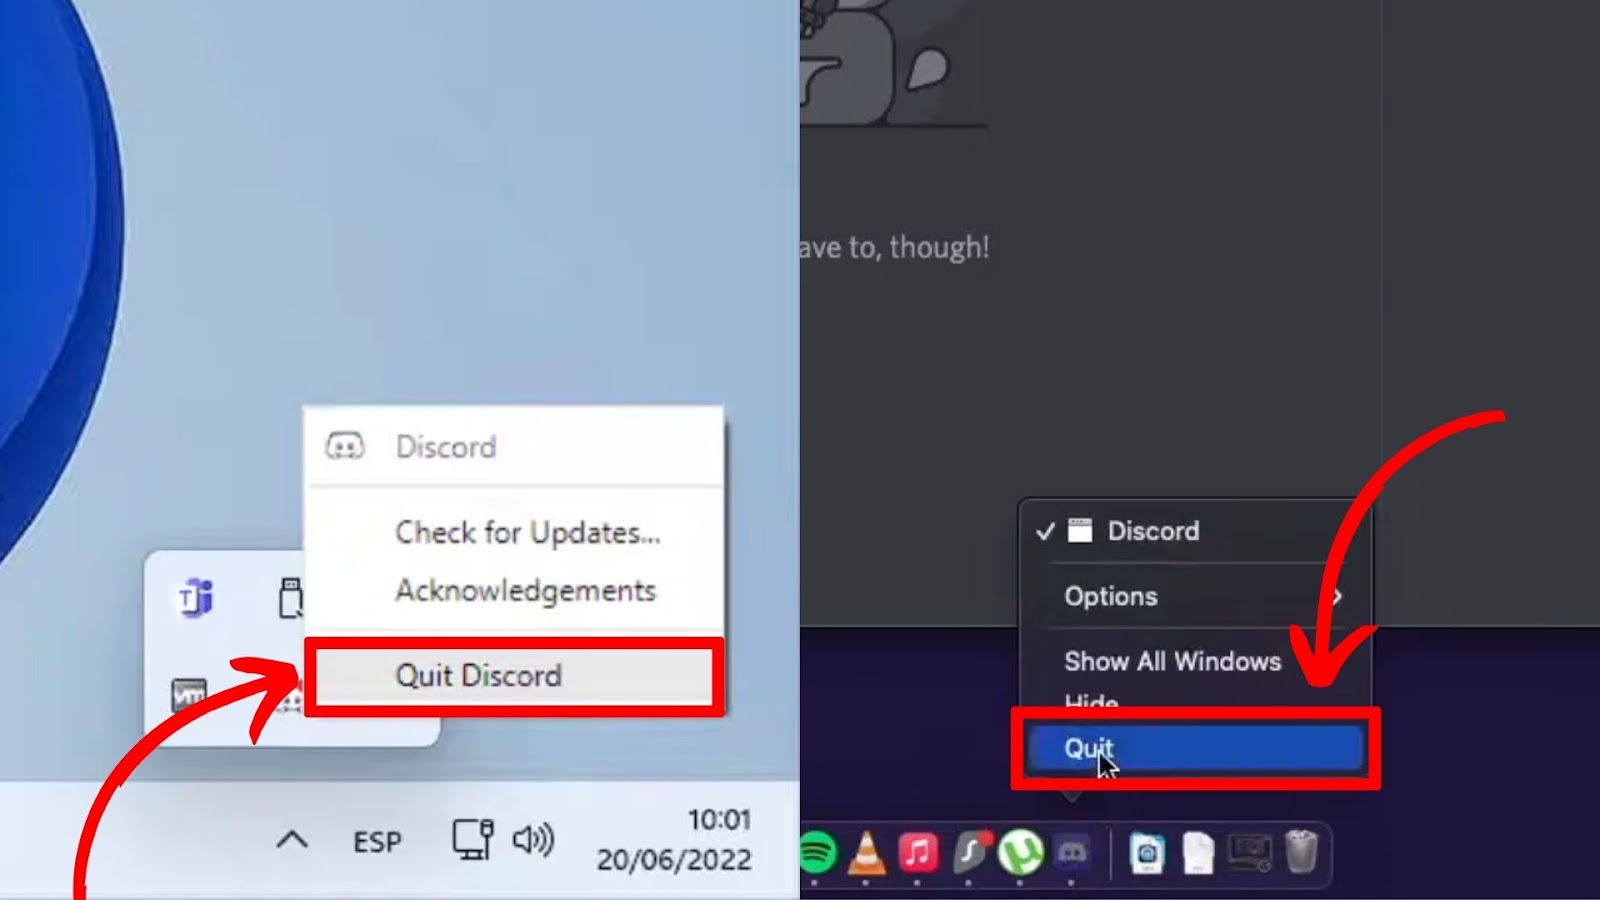 Quit Discord to Restart it on PC and Mac